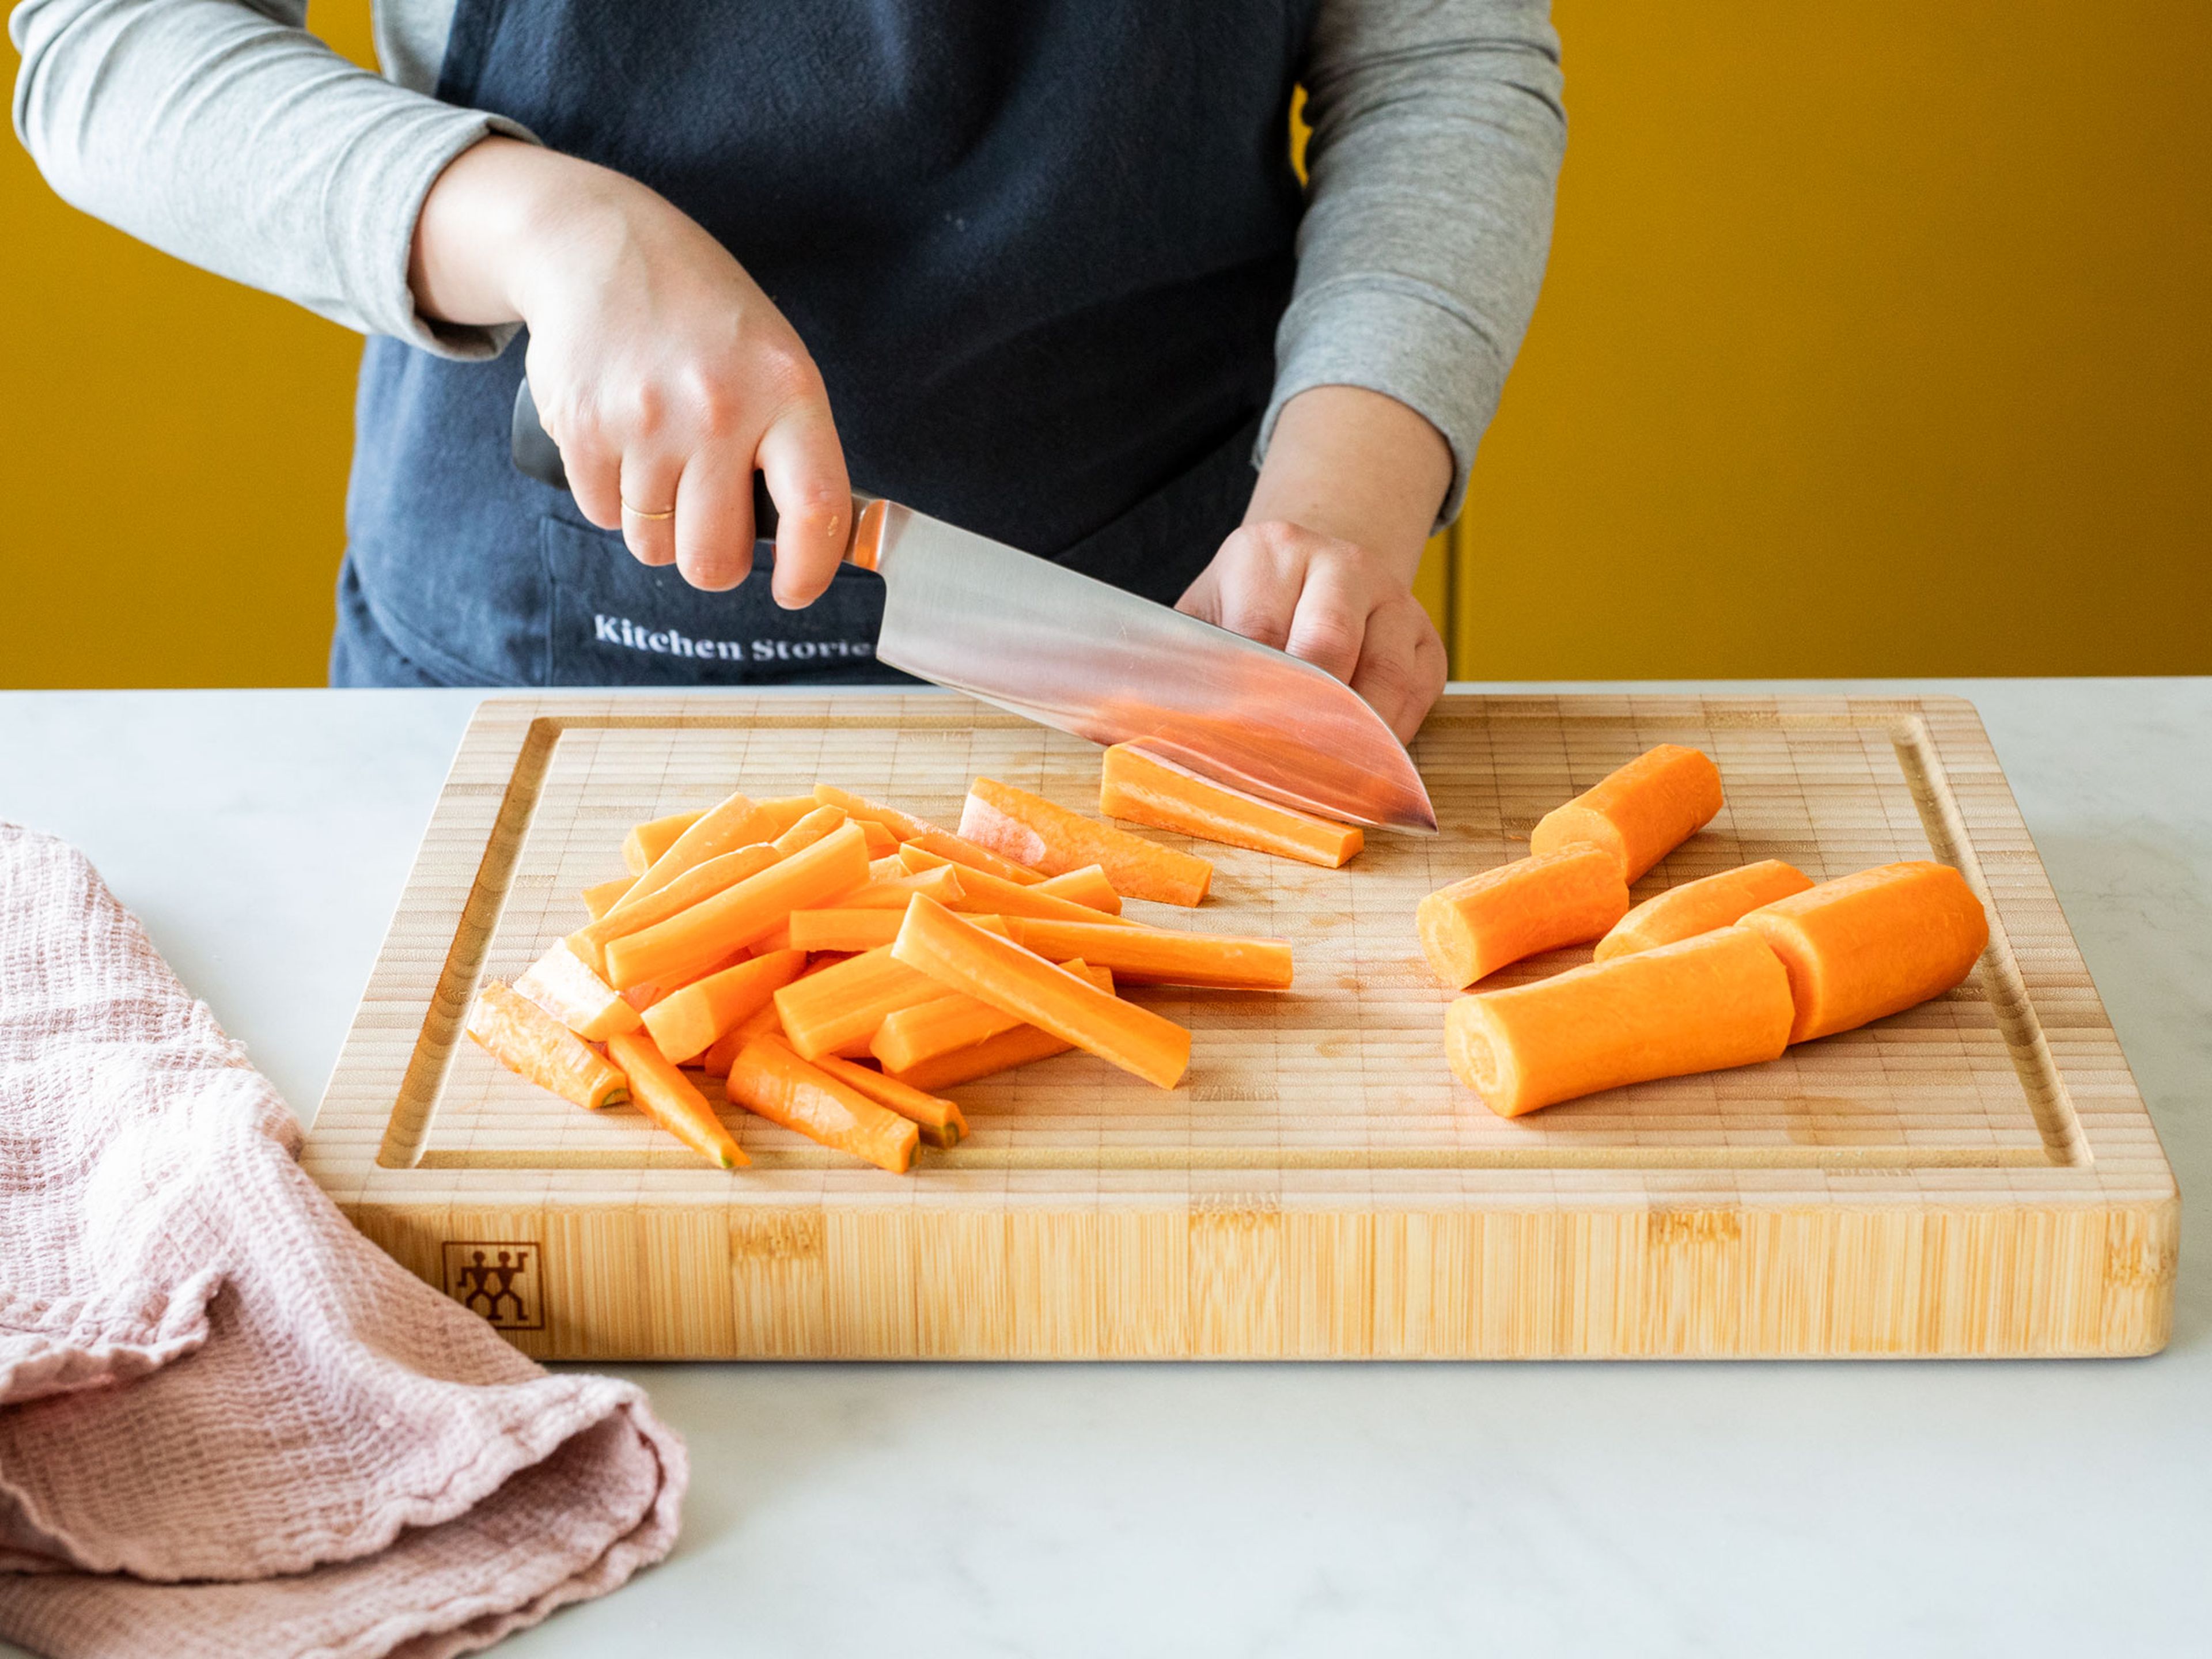 Preheat oven to 160°C/320°F. Slice shallots and set aside. Wash and peel carrots. Cut most of the orange carrots into thicker strips, then use a peeler to peel the remaining carrots into very thin strips and set aside.